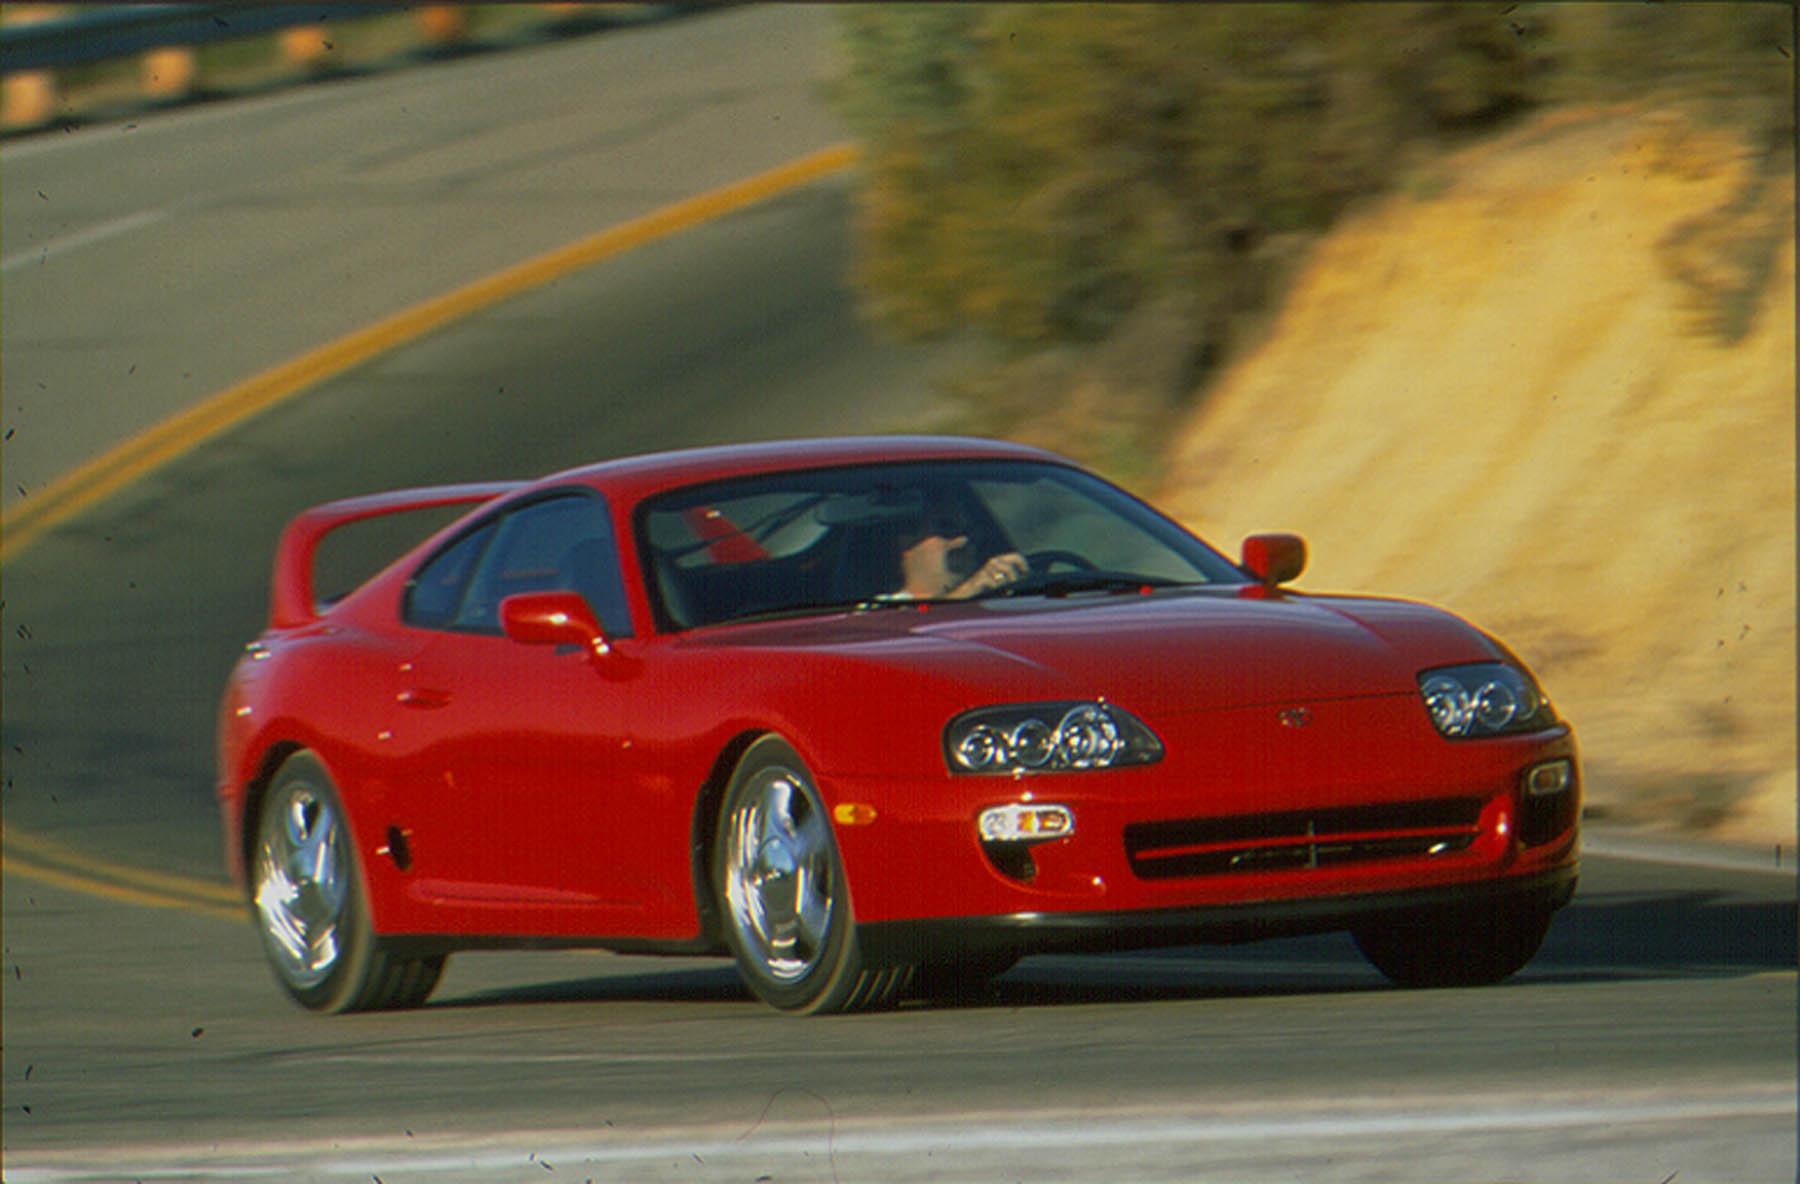 Next-Gen Toyota Supra Could Be All-Electric, Report Suggests